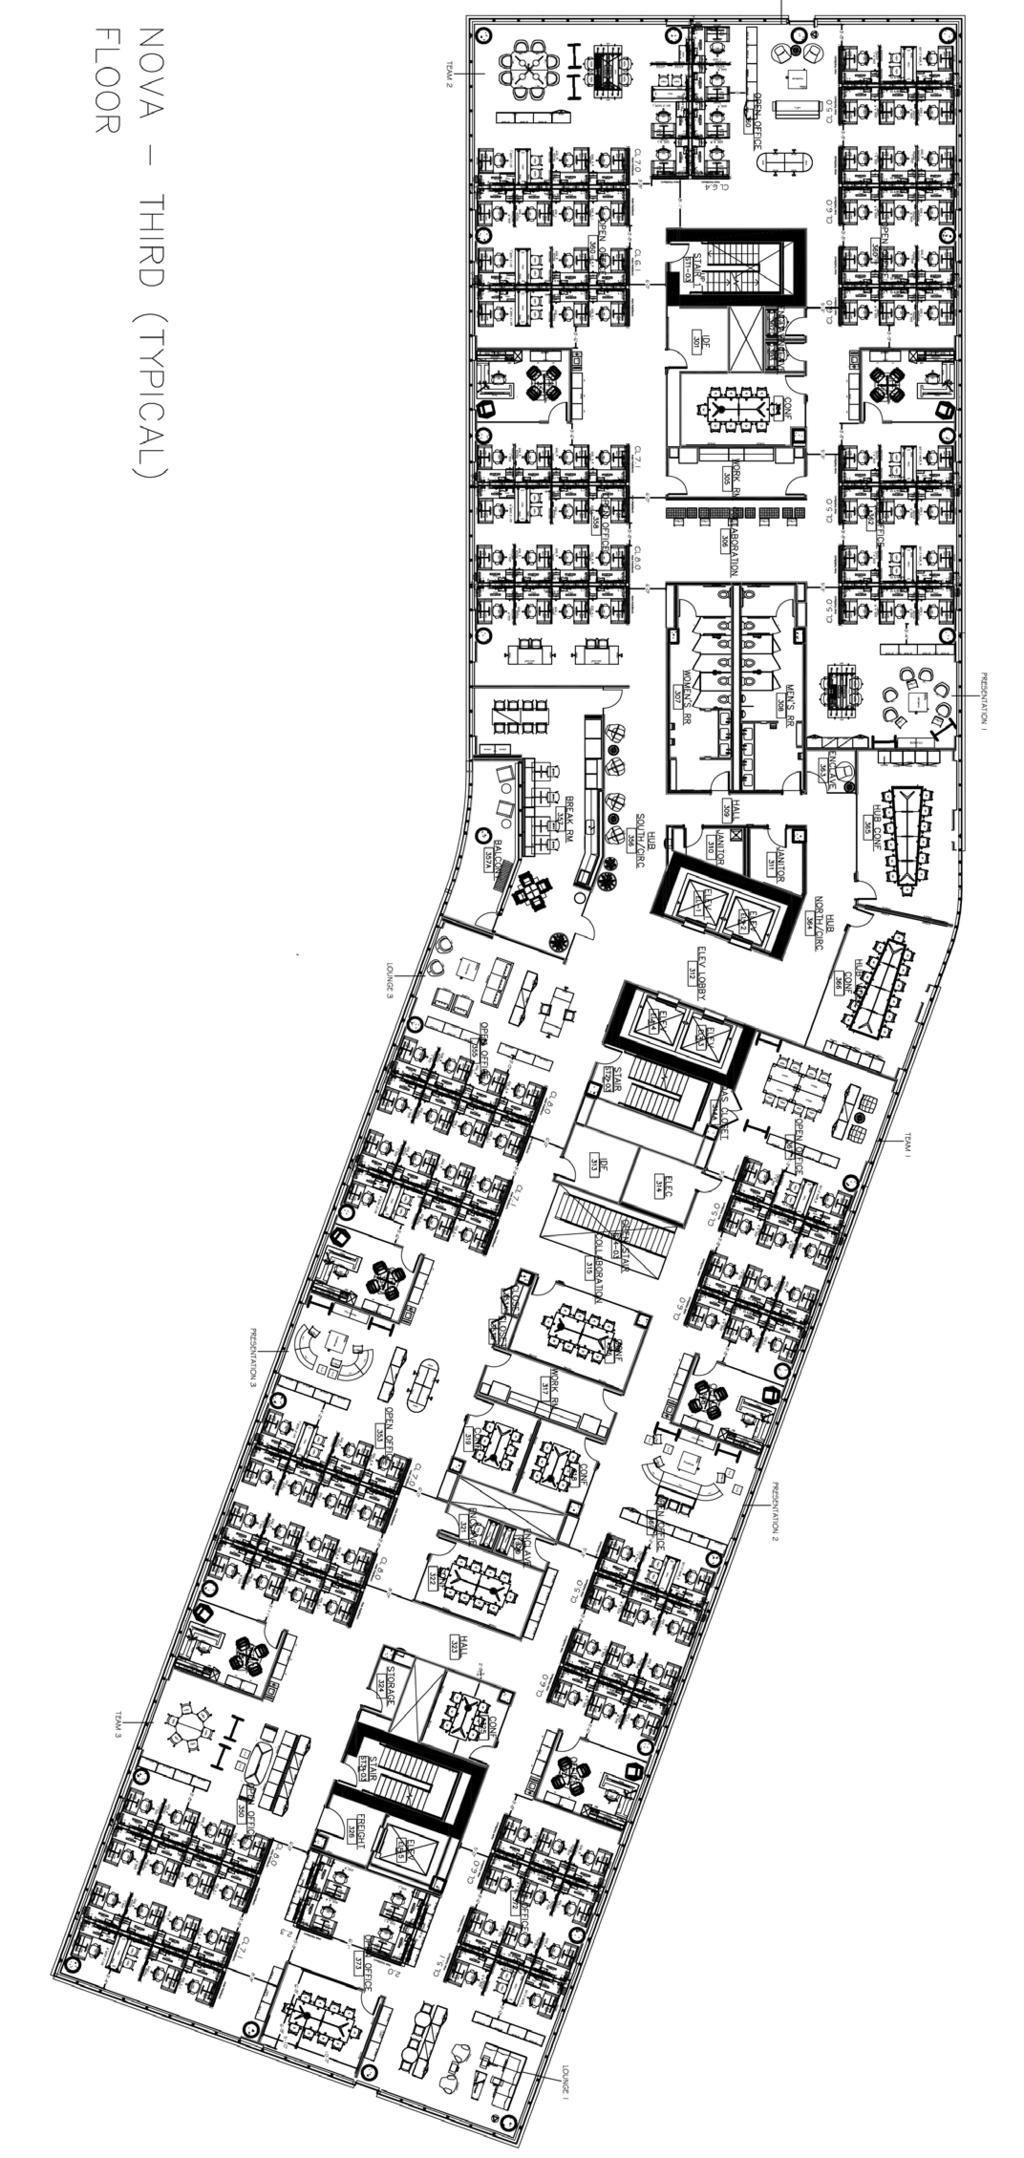 Typical Open Office Floor Plan Within the open office floor plate, workspaces are setup in neighborhoods and planned using a holistic kit of parts.